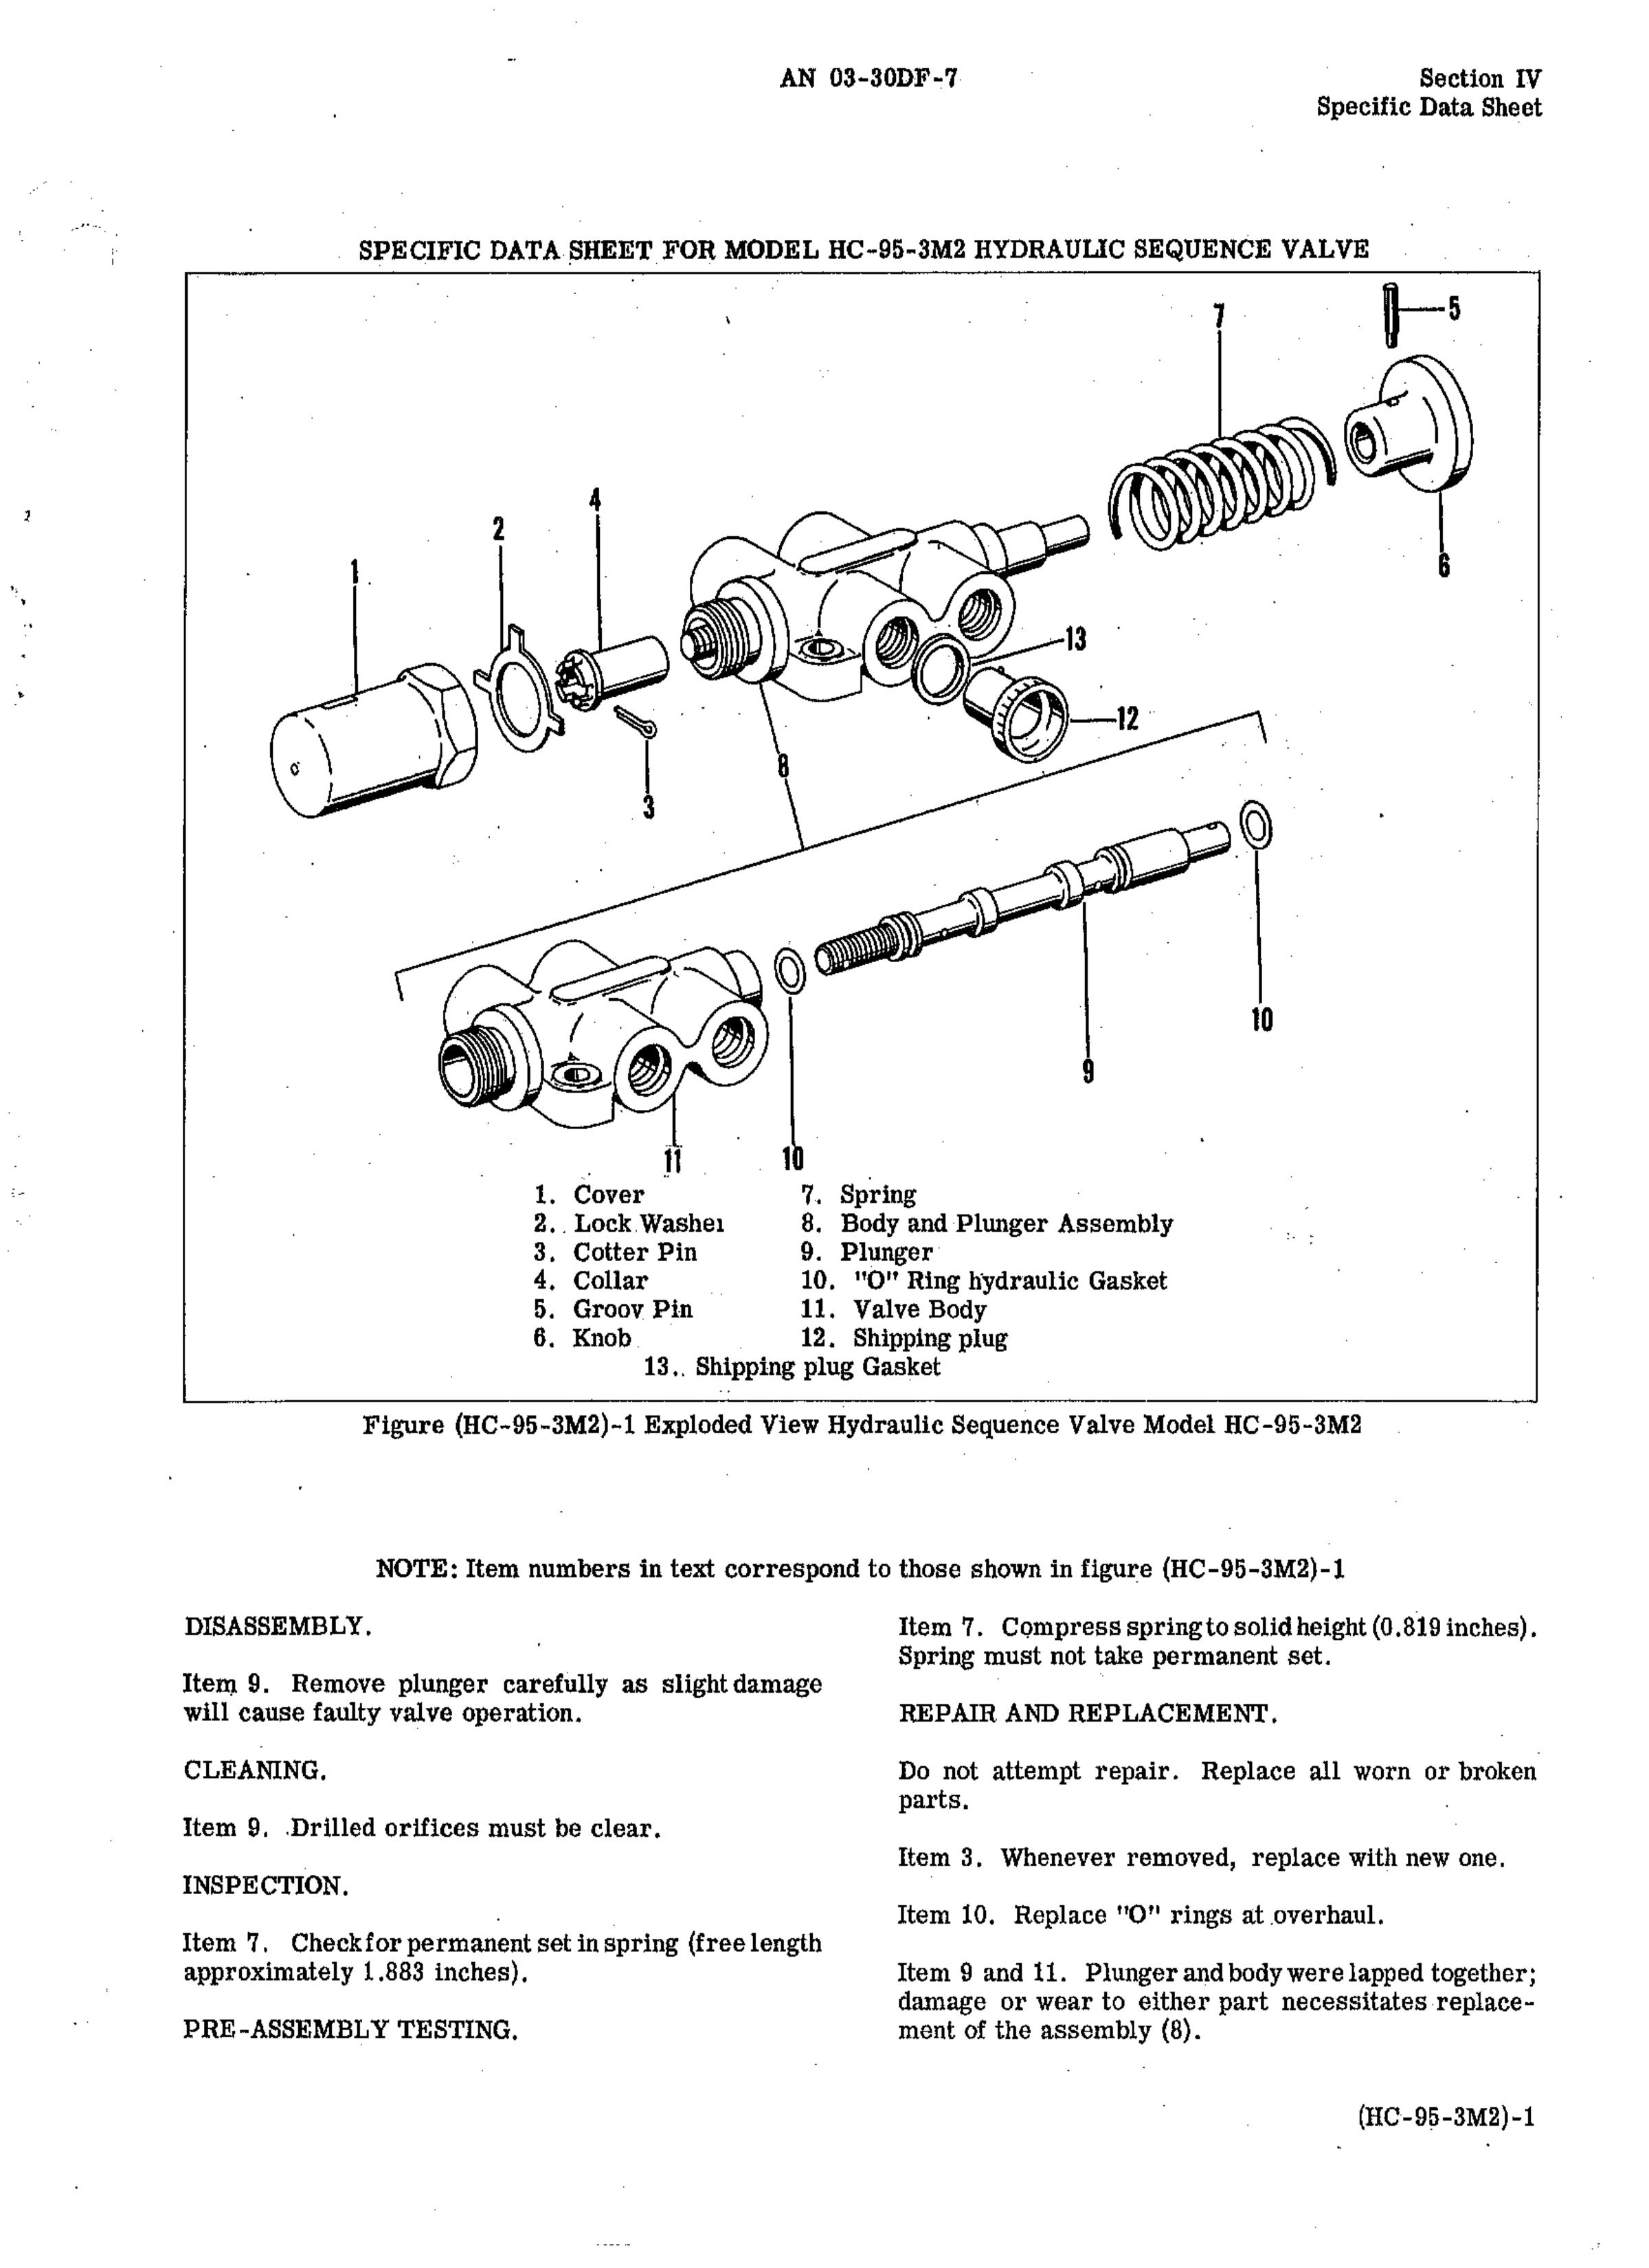 Sample page 5 from AirCorps Library document: Overhaul Instructions for Hydraulic Sequence Valves